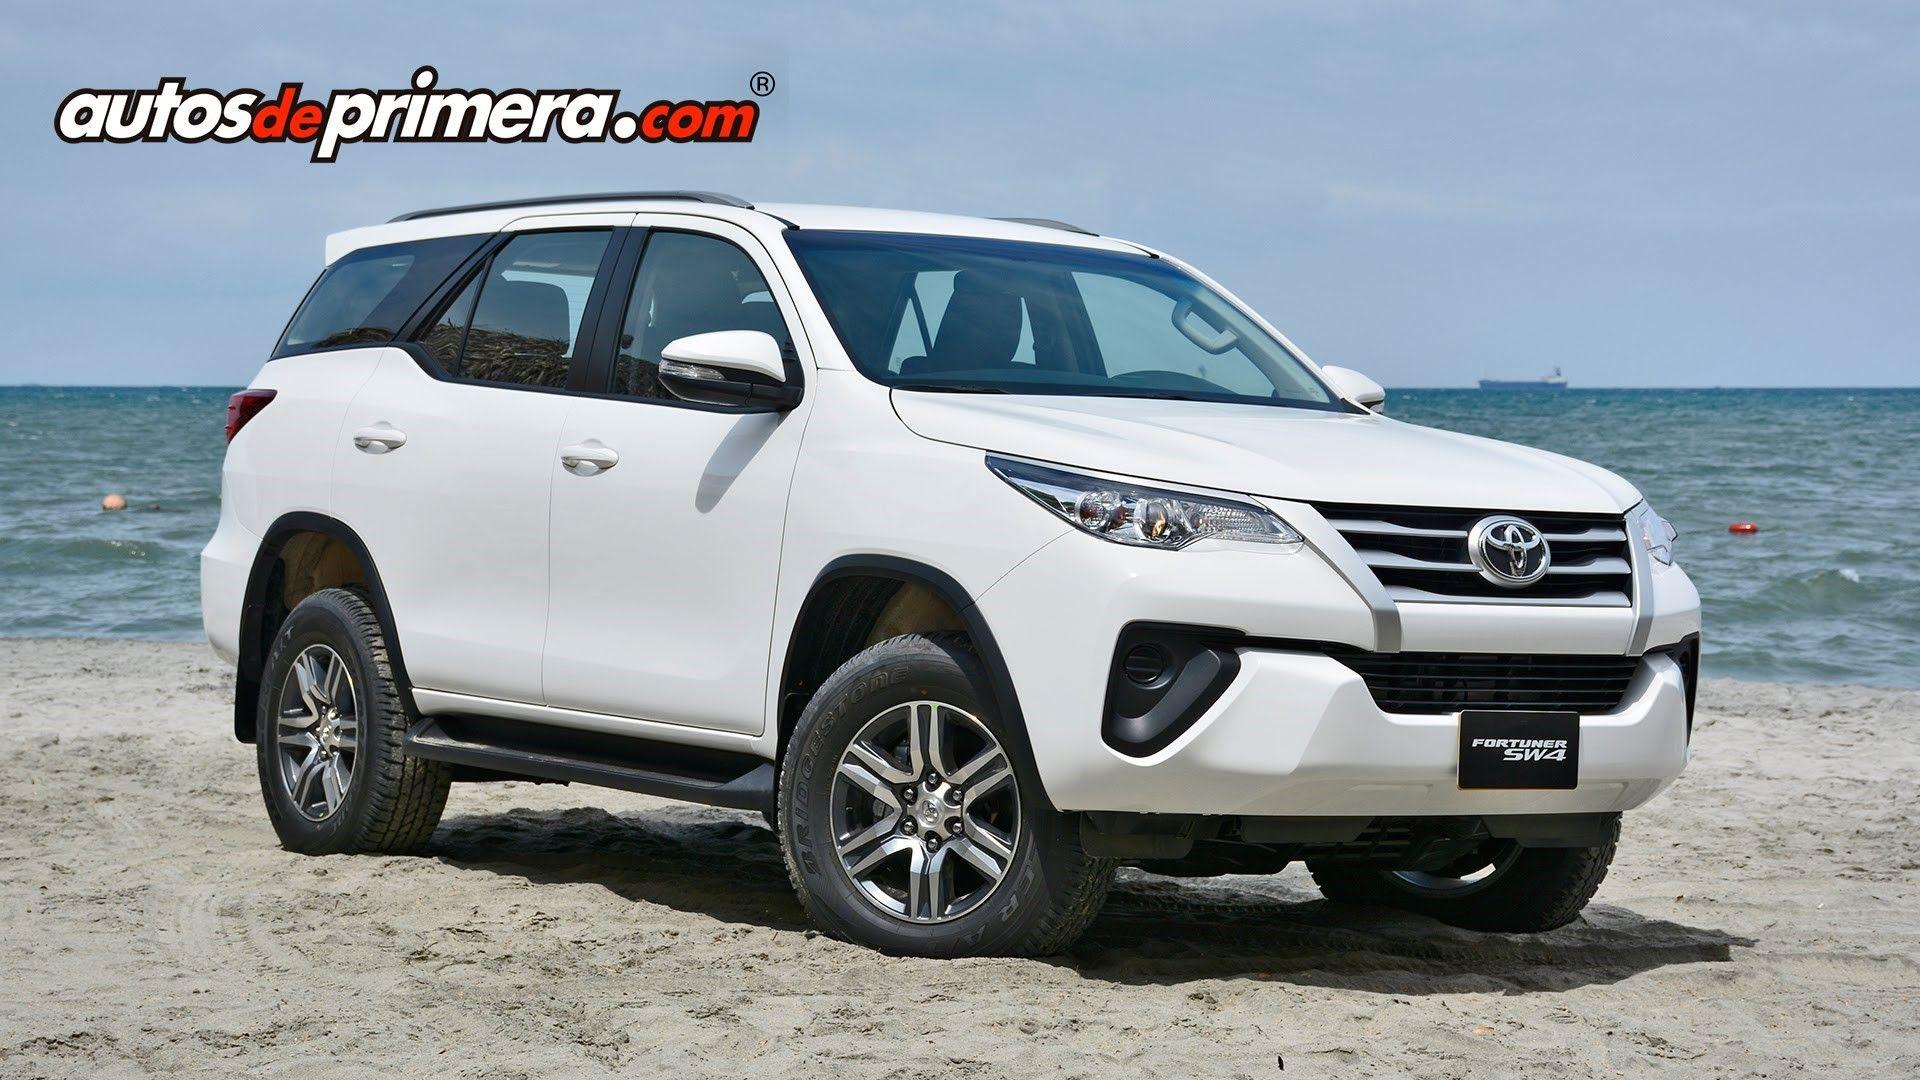 Toyota Fortuner Wallpaper Cave